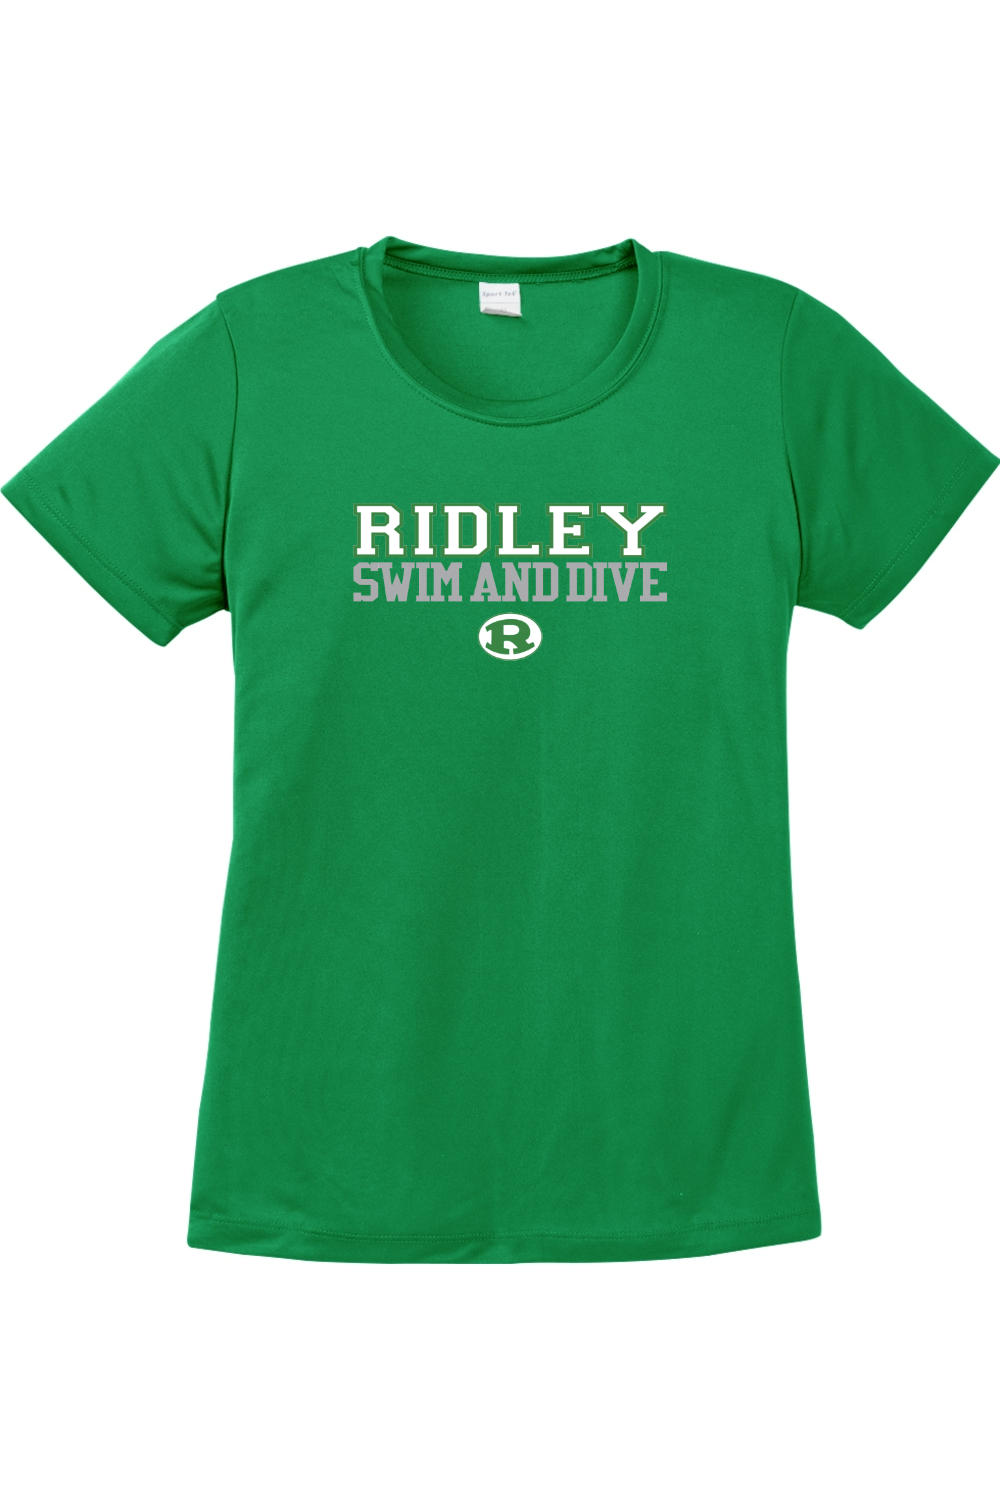 Ridley Swim and Dive Sport-Tek Ladies PosiCharge Competitor Tee